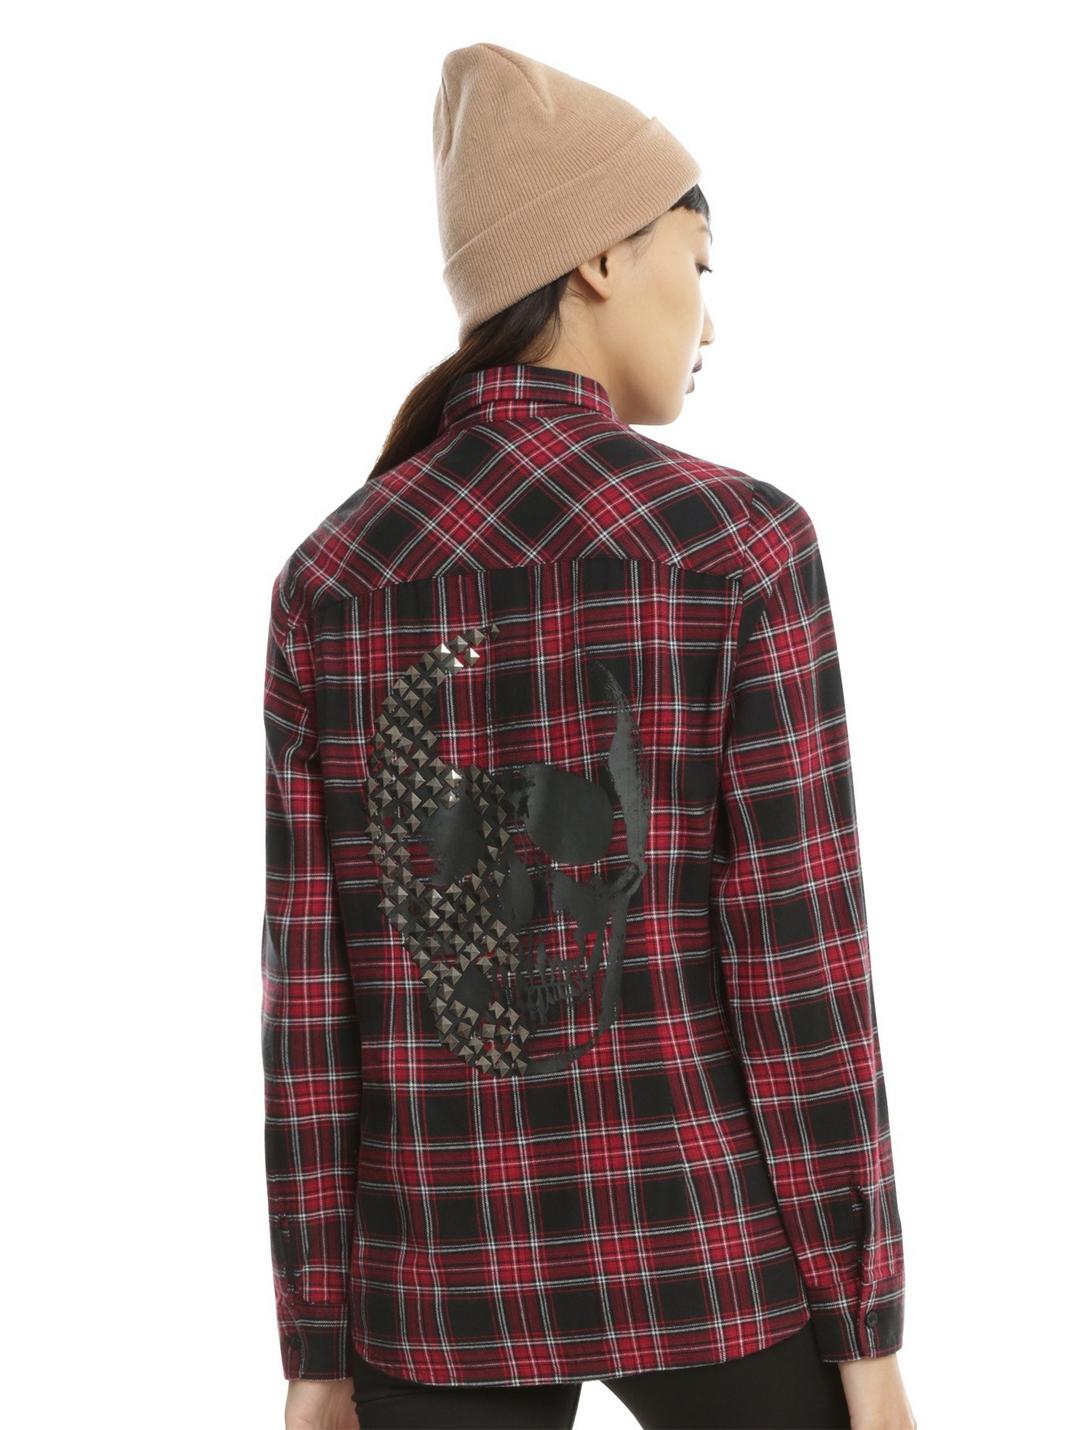 Red Black & White Plaid Studded Skull Girls Woven Button-Up, RED, hi-res